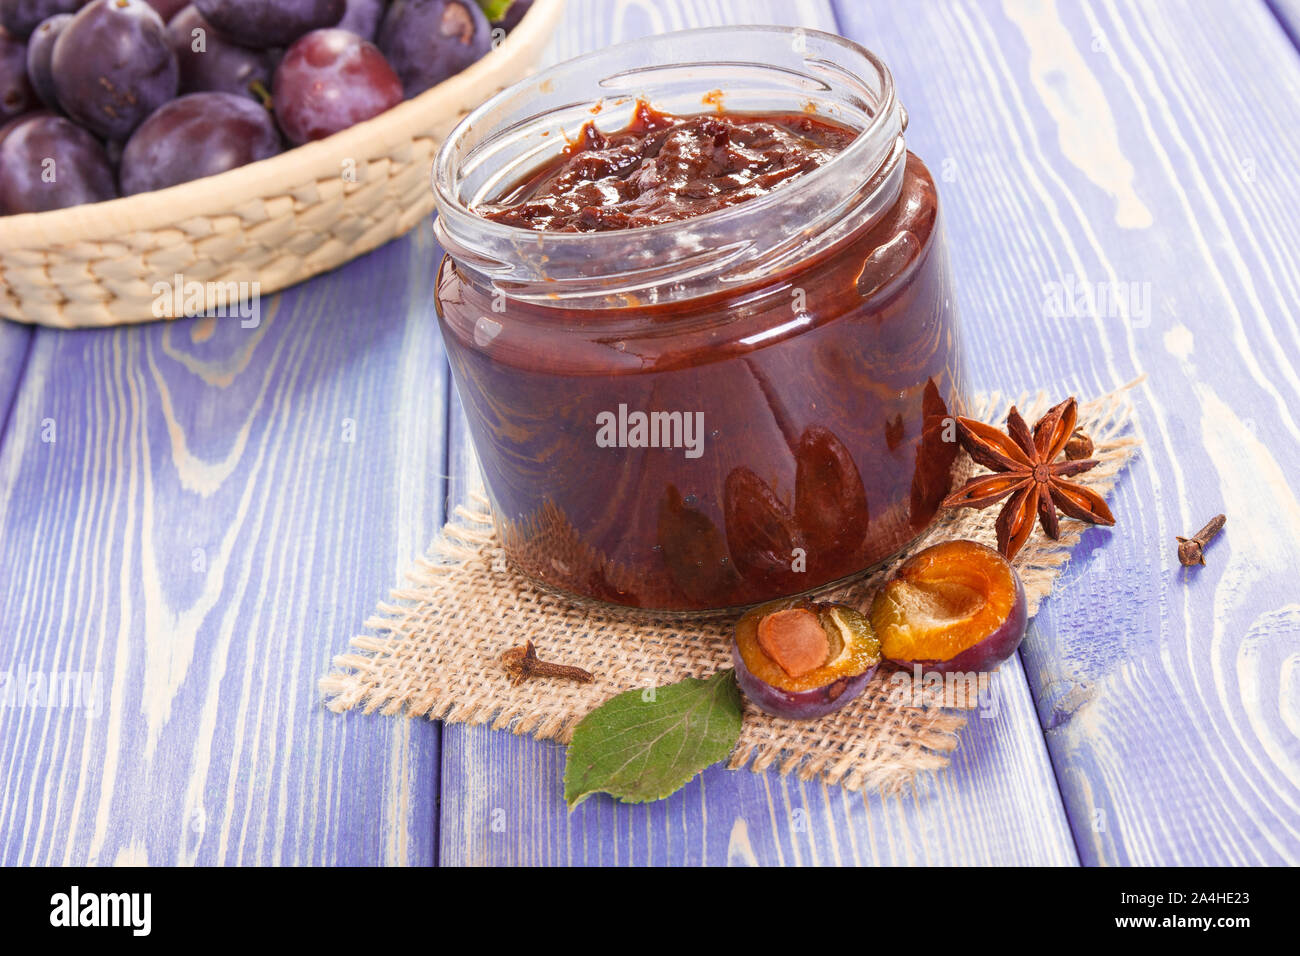 Fresh homemade plum marmalade in glass jar, spices and ripe fruits in wicker basket in background, concept of healthy sweet dessert Stock Photo